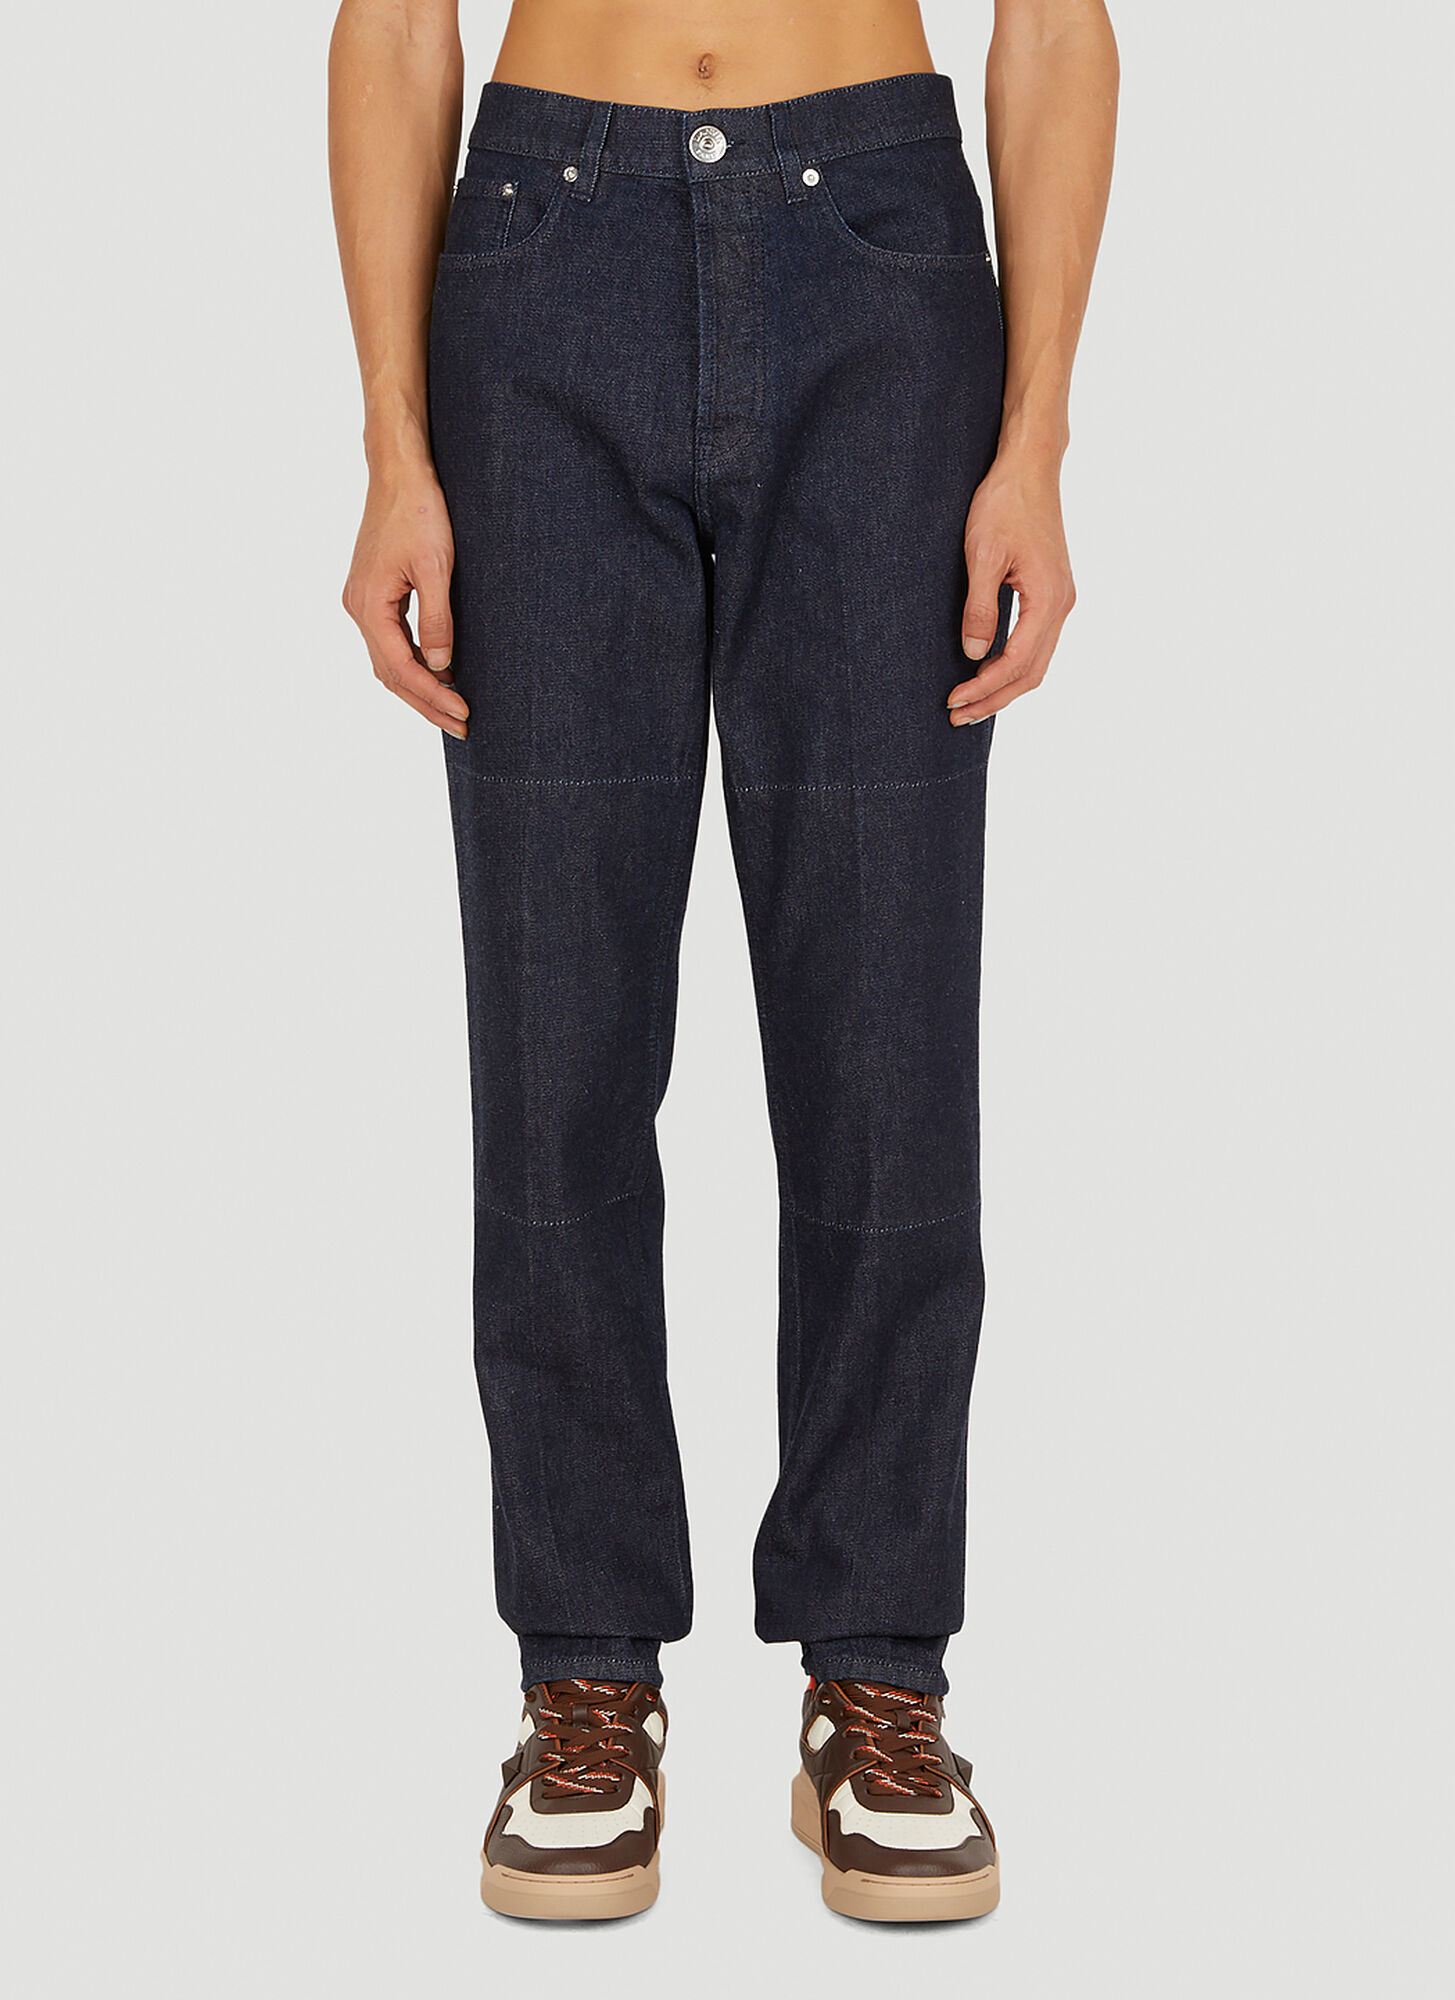 Lanvin Panelled Jeans In Blue